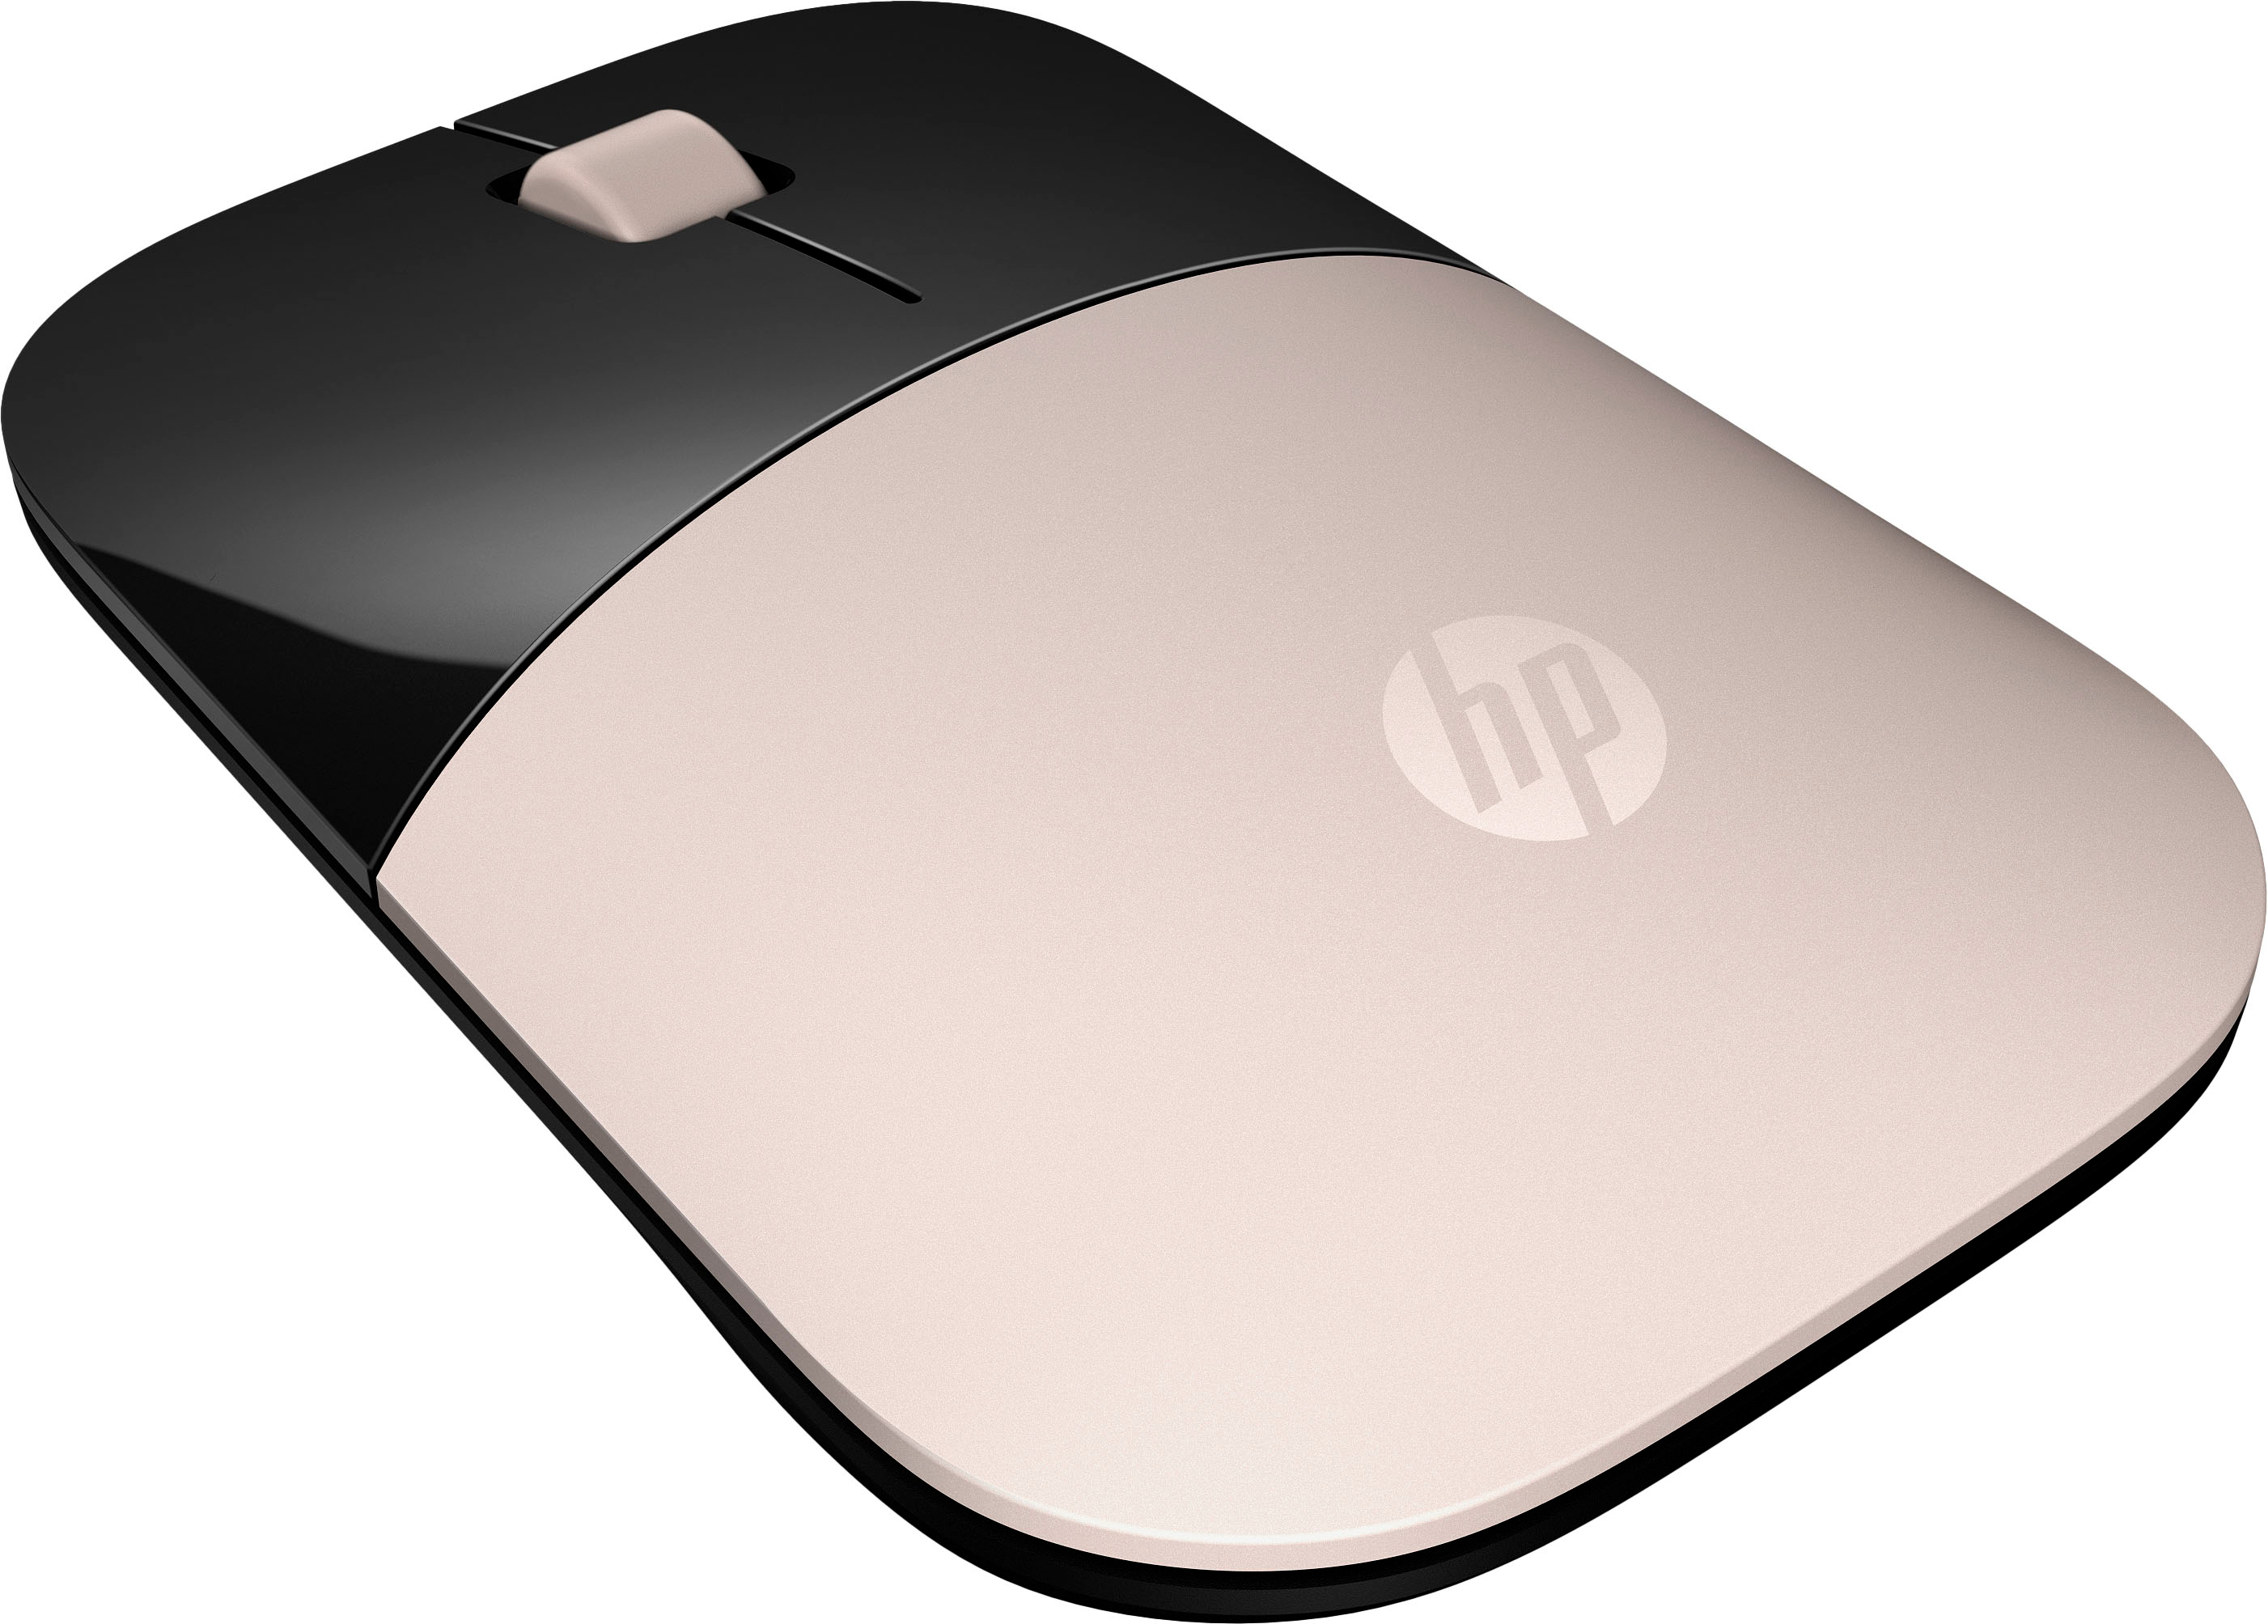 Wireless Buy: HP Best Mouse 66Z12AA#ABL Z3700 Optical G2 Ambidextrous Rose Gold